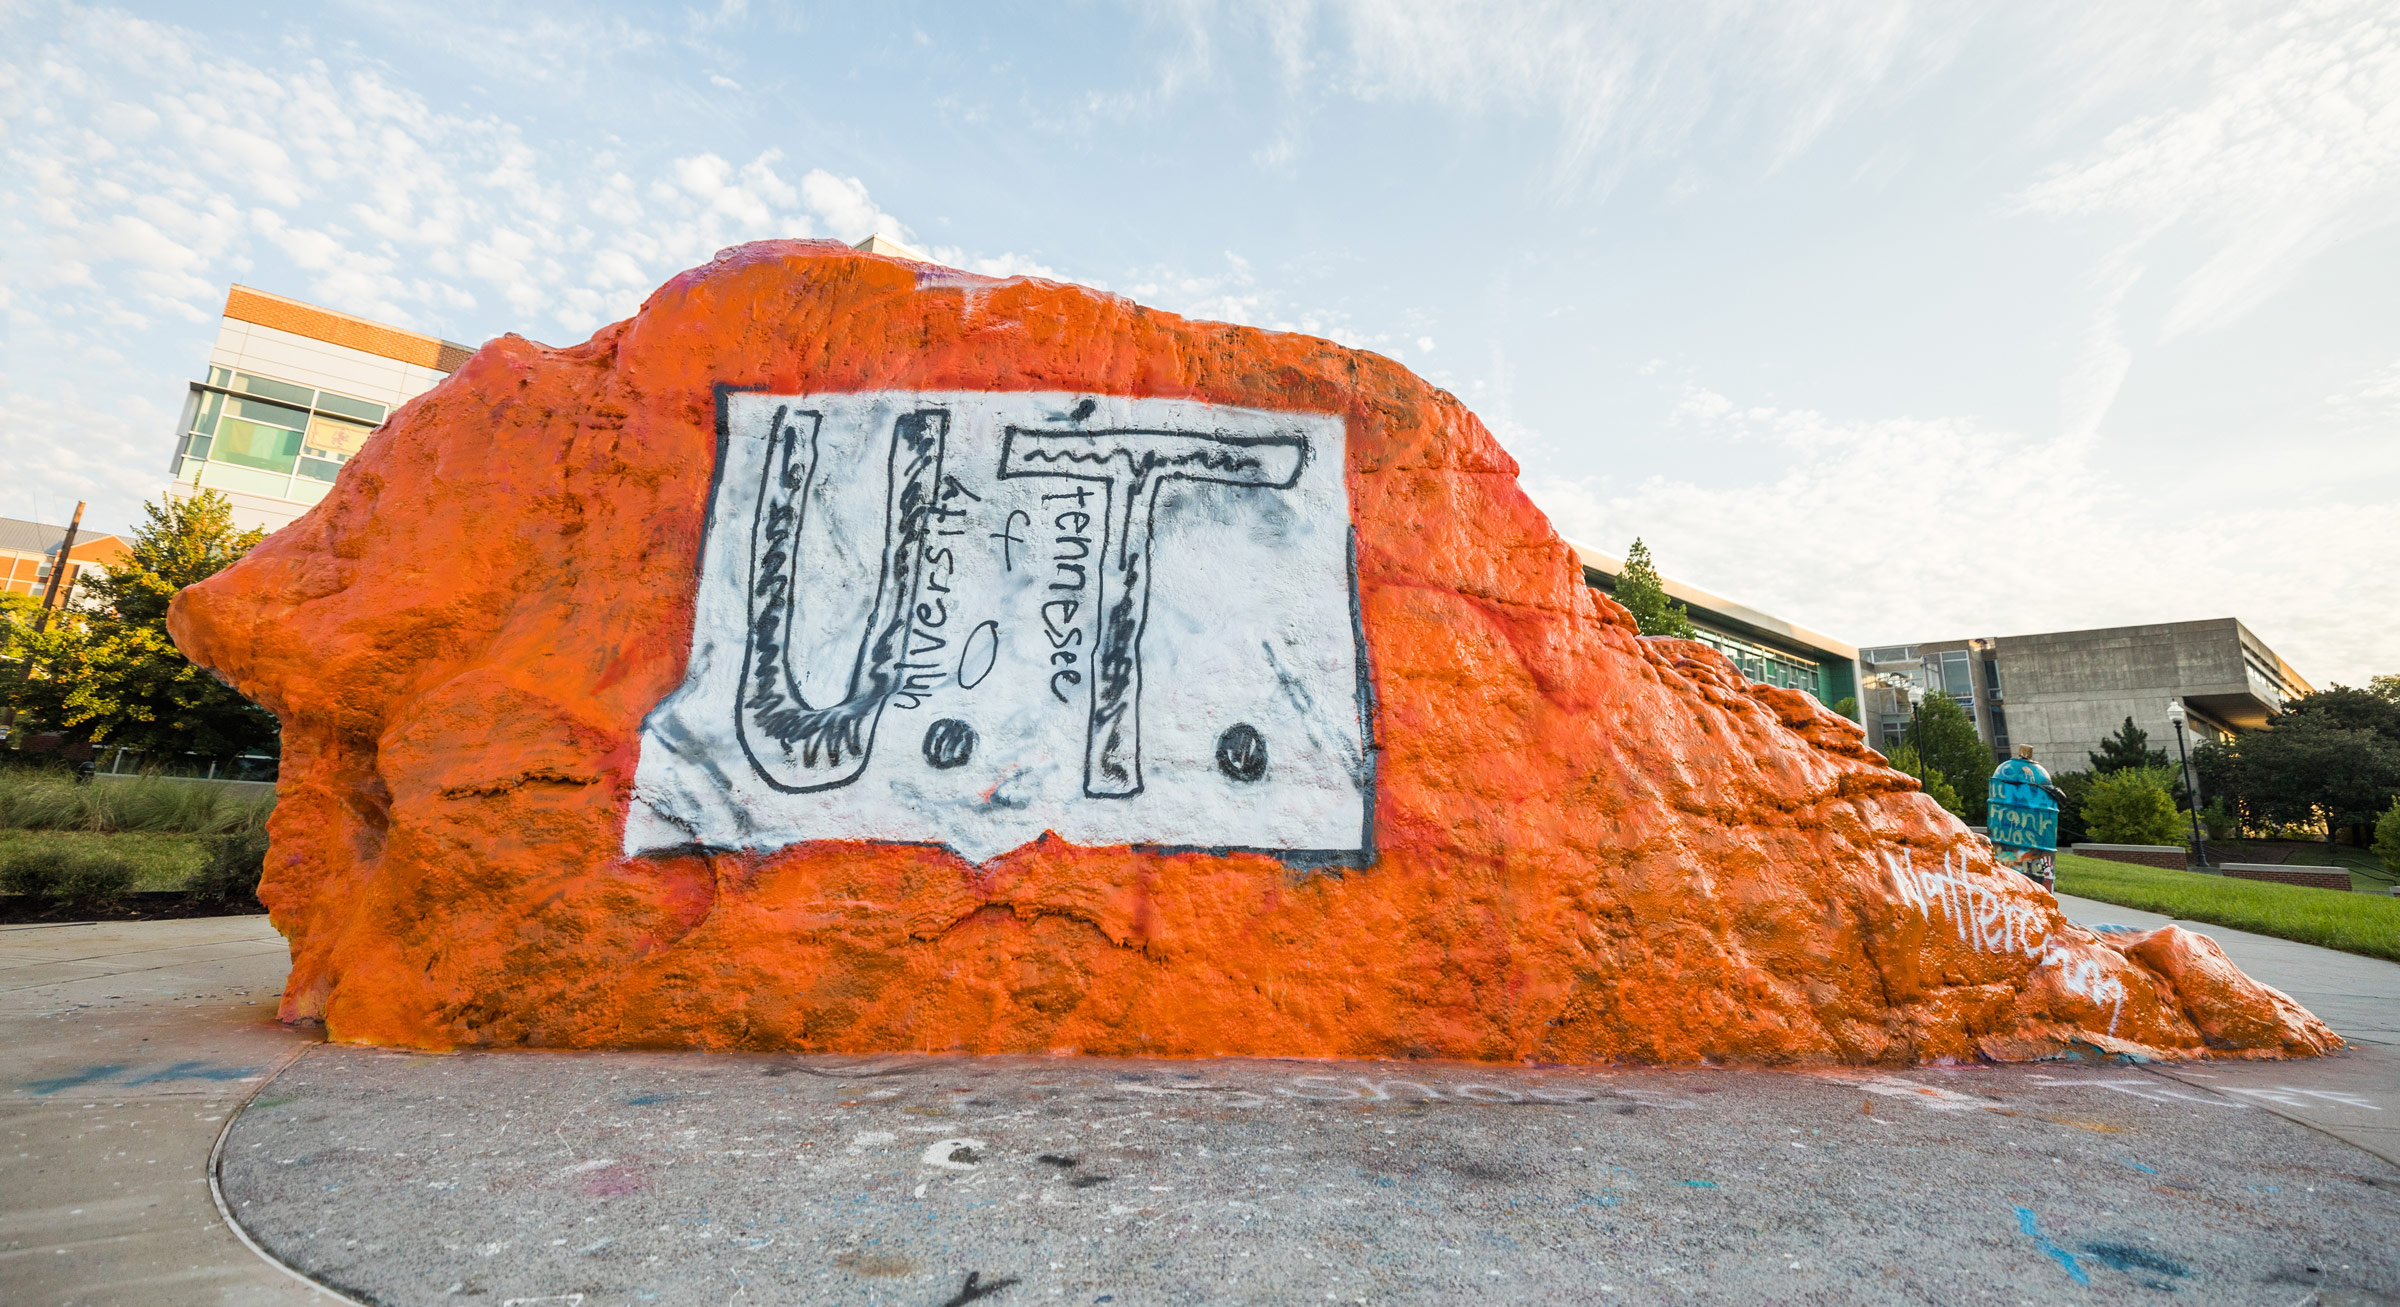 The Rock at UT painted orange with what looks like a white paper with a hand drawn UT design pinned to it